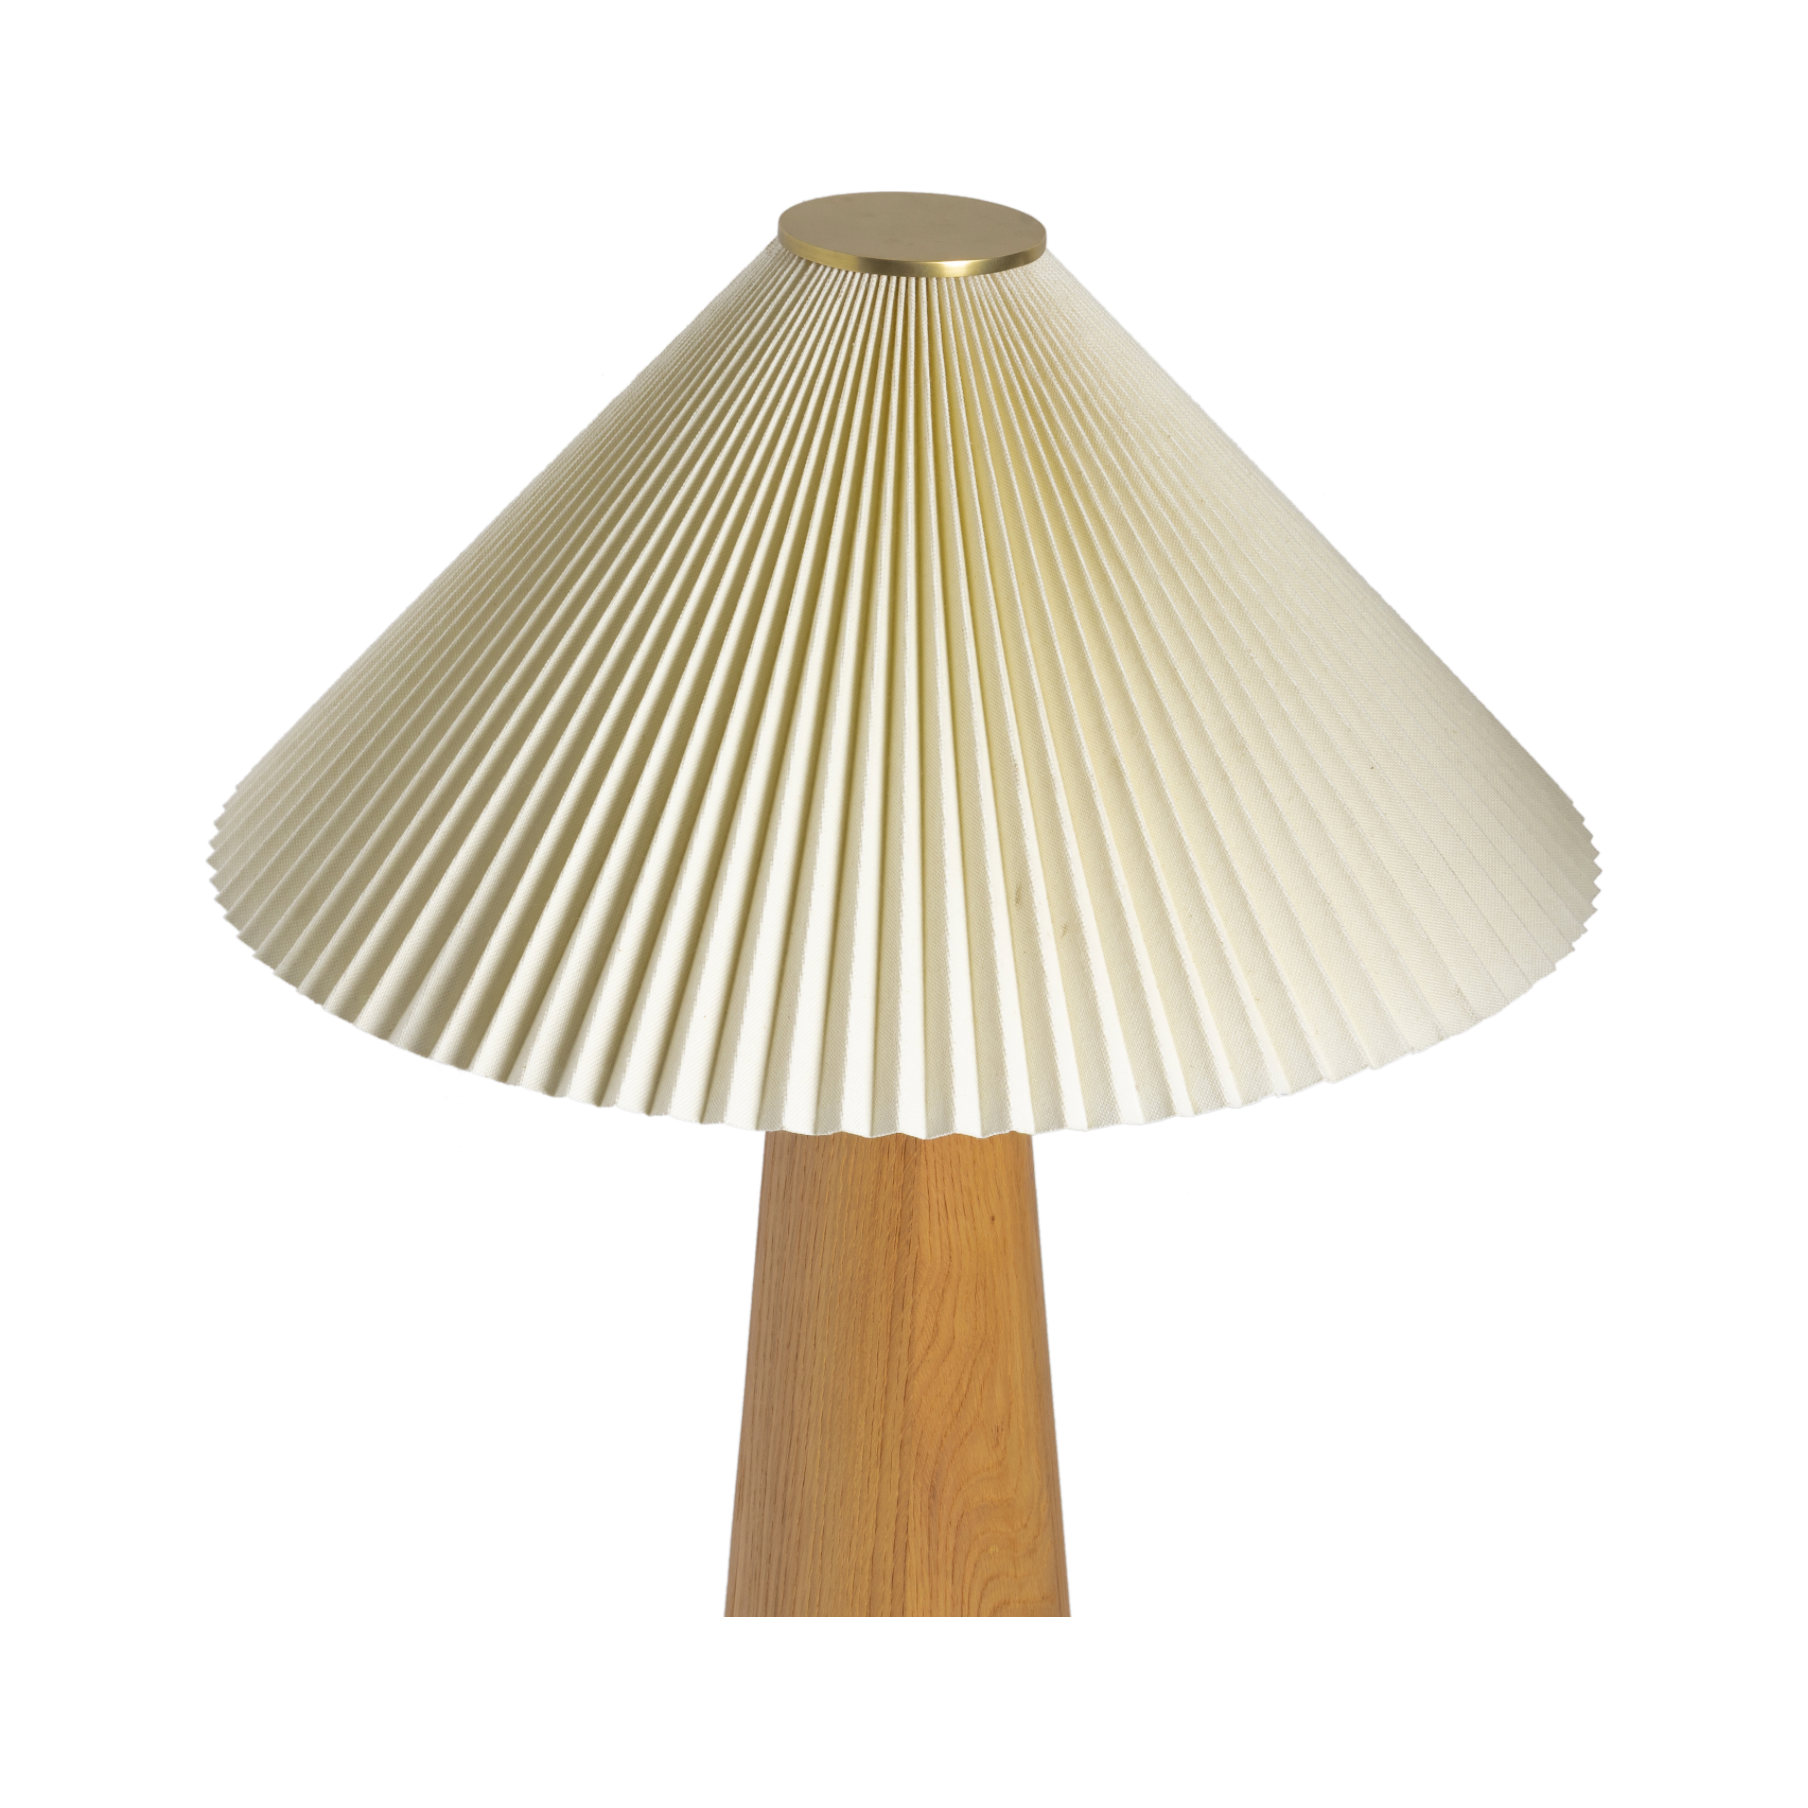 Modern minimal meets traditional. A tapered wood table lamp base is topped with a design-forward pleated shade. Amethyst Home provides interior design, new home construction design consulting, vintage area rugs, and lighting in the Calabasis metro area.